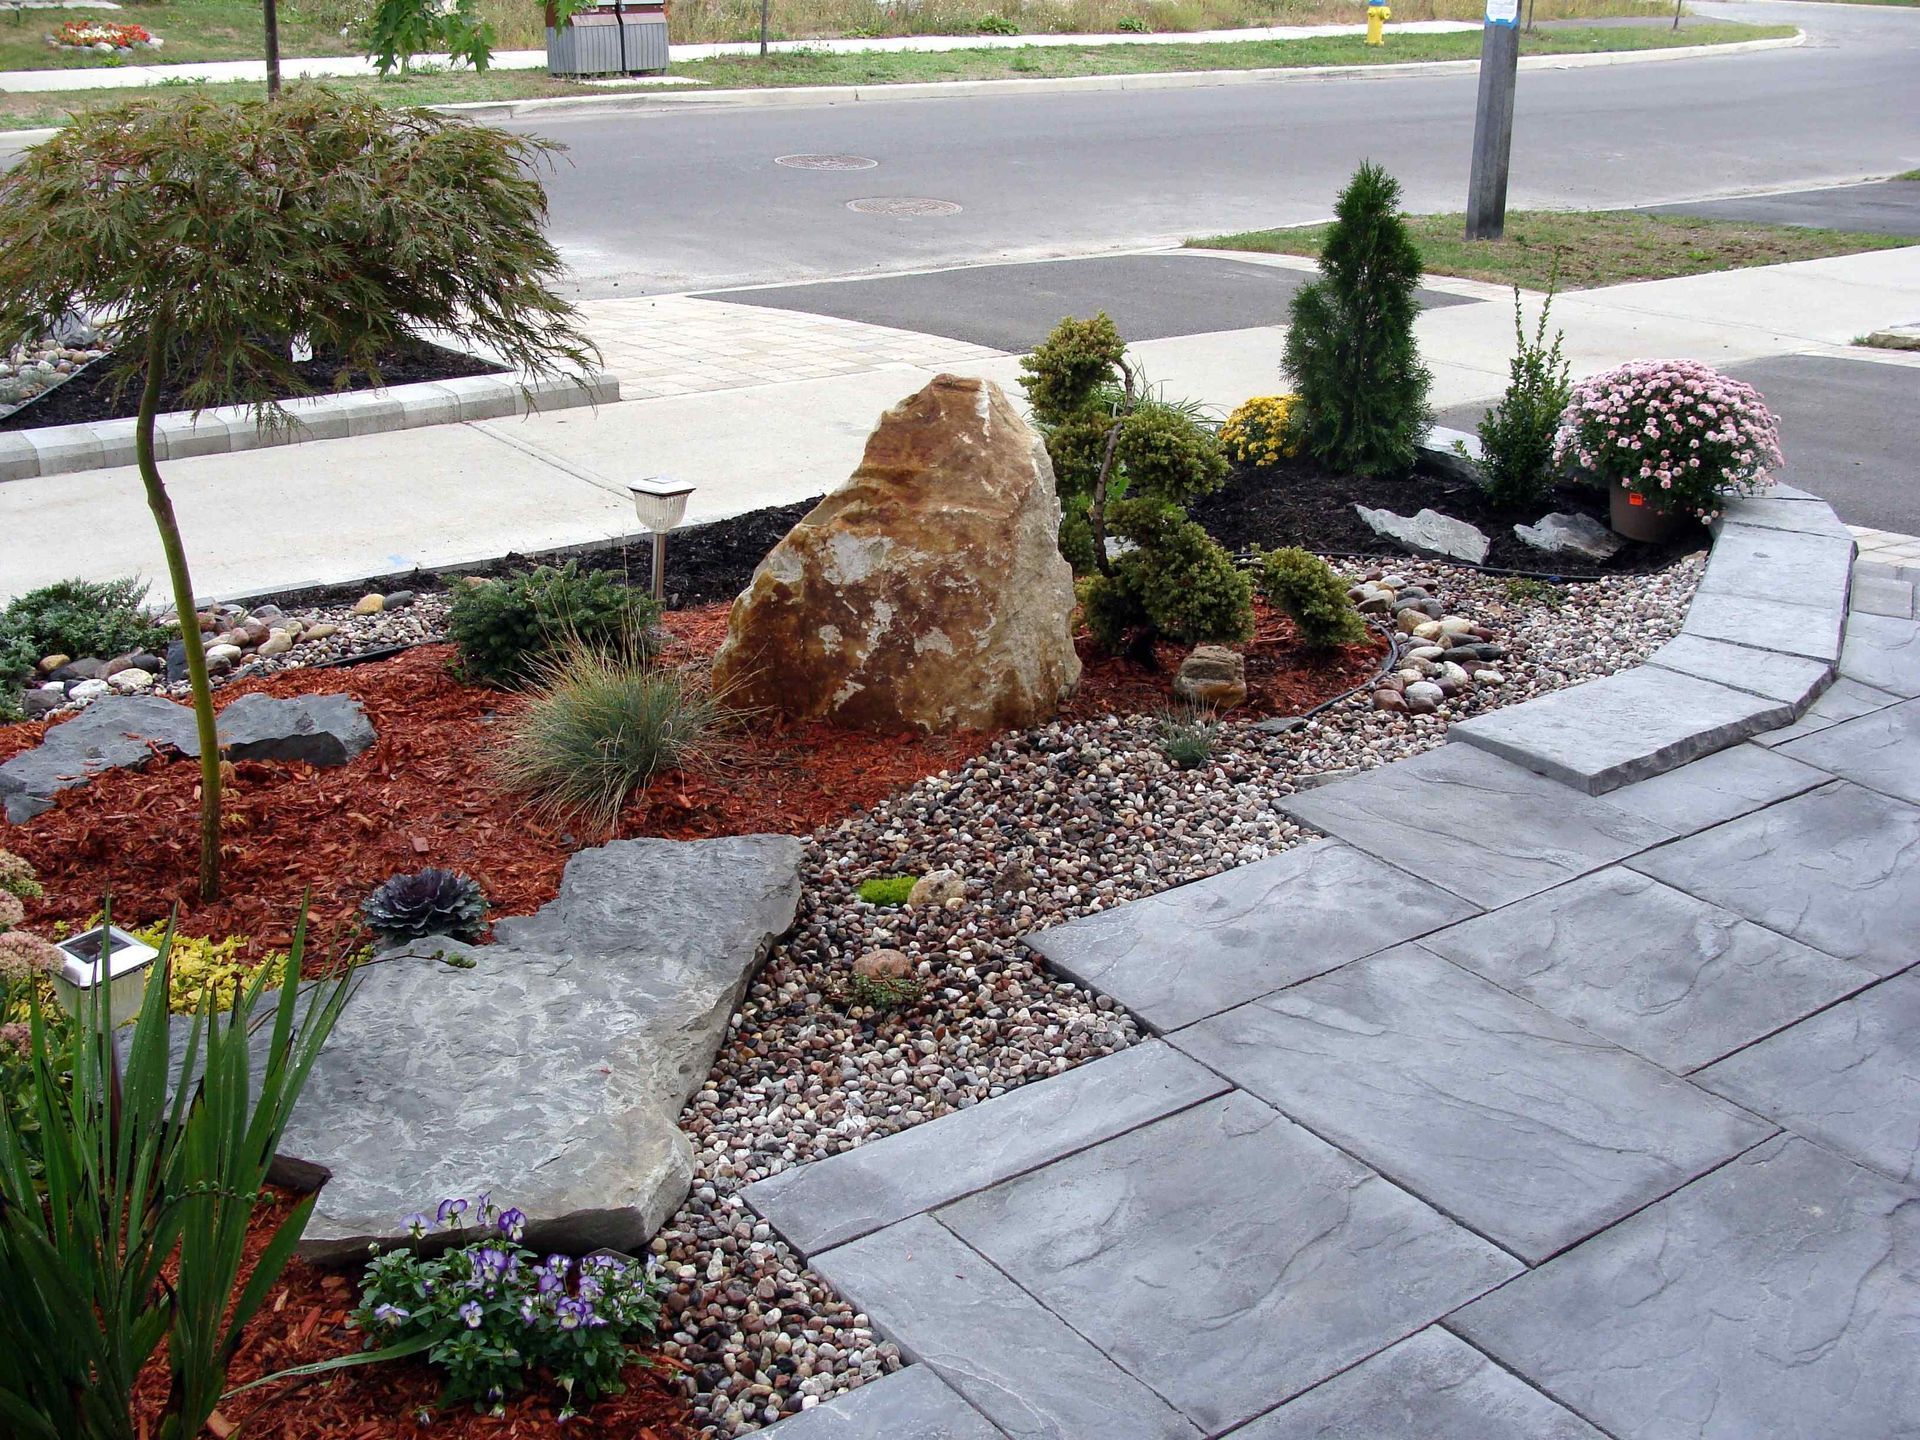 Affordable Drought Resistant Flower Bed with Stones and Large Rocks Plus Shrubs and Small Trees